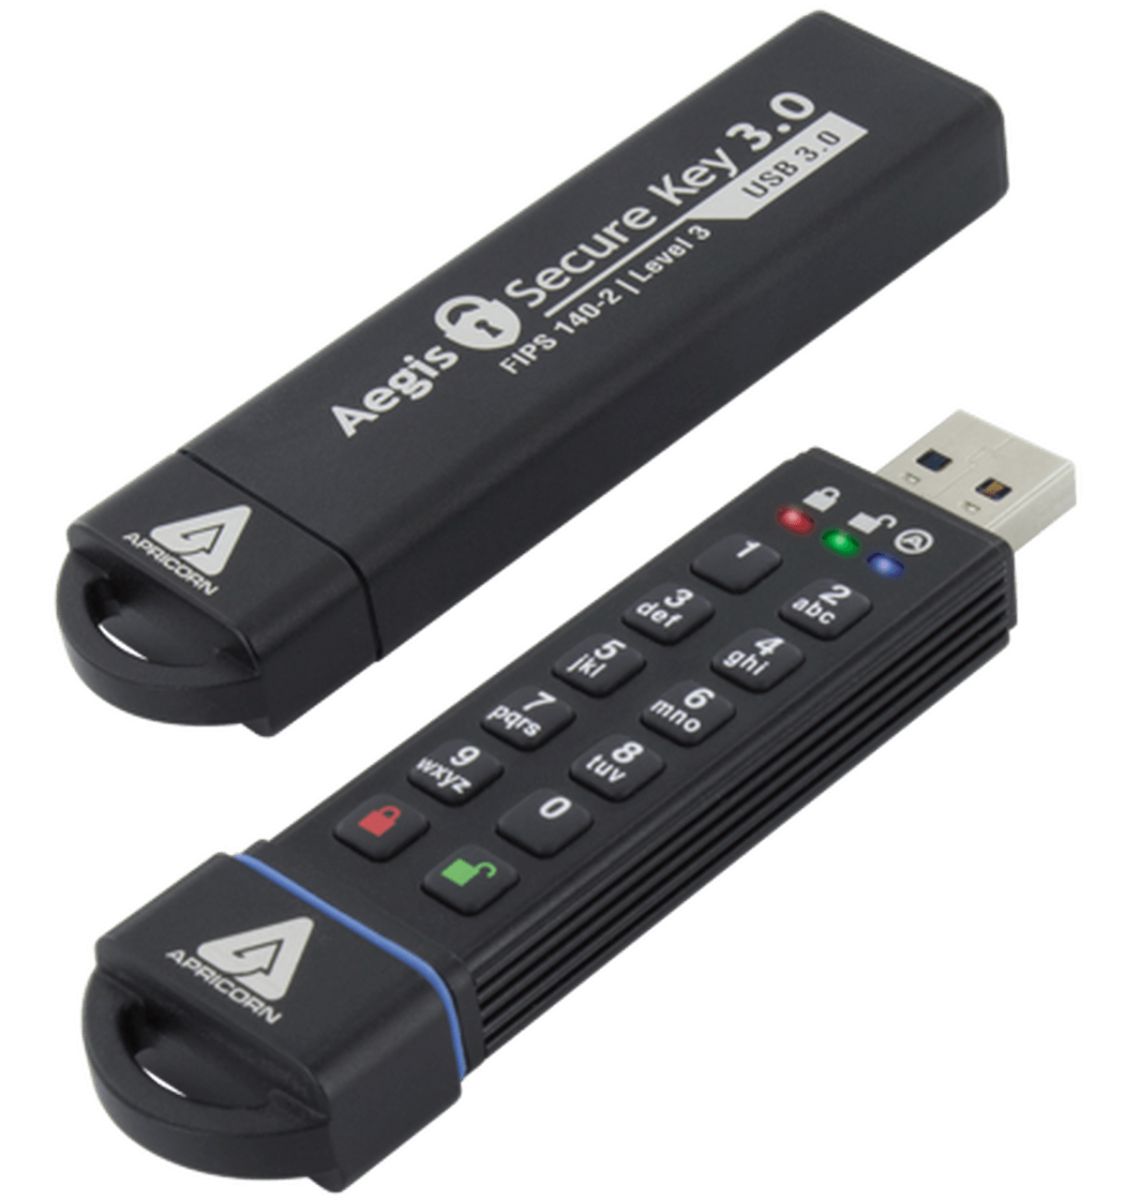 apricorn ask3 fips 240gb usbstick